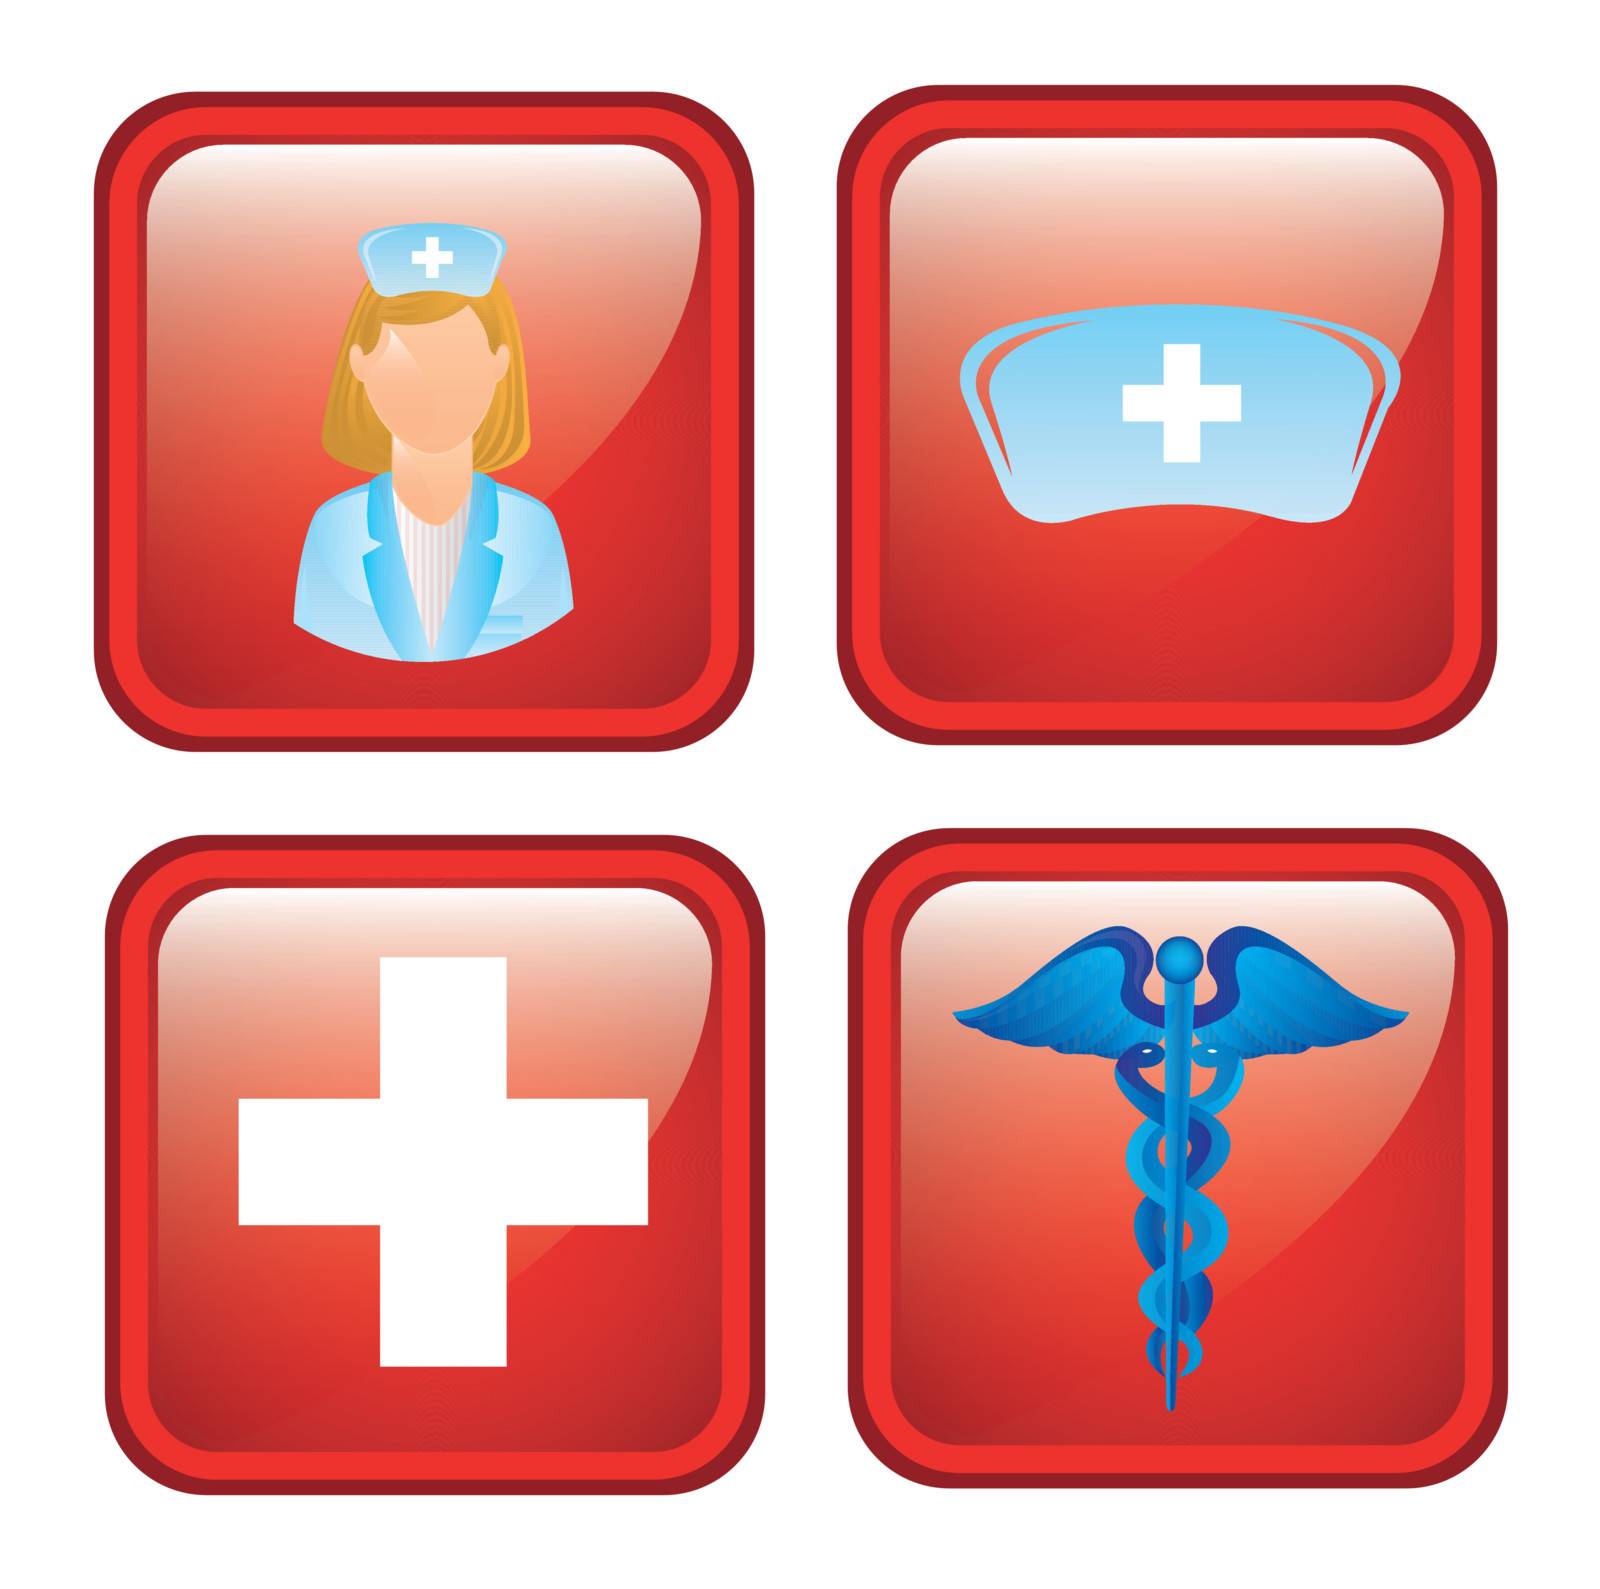 Health icons over black background vector illustration